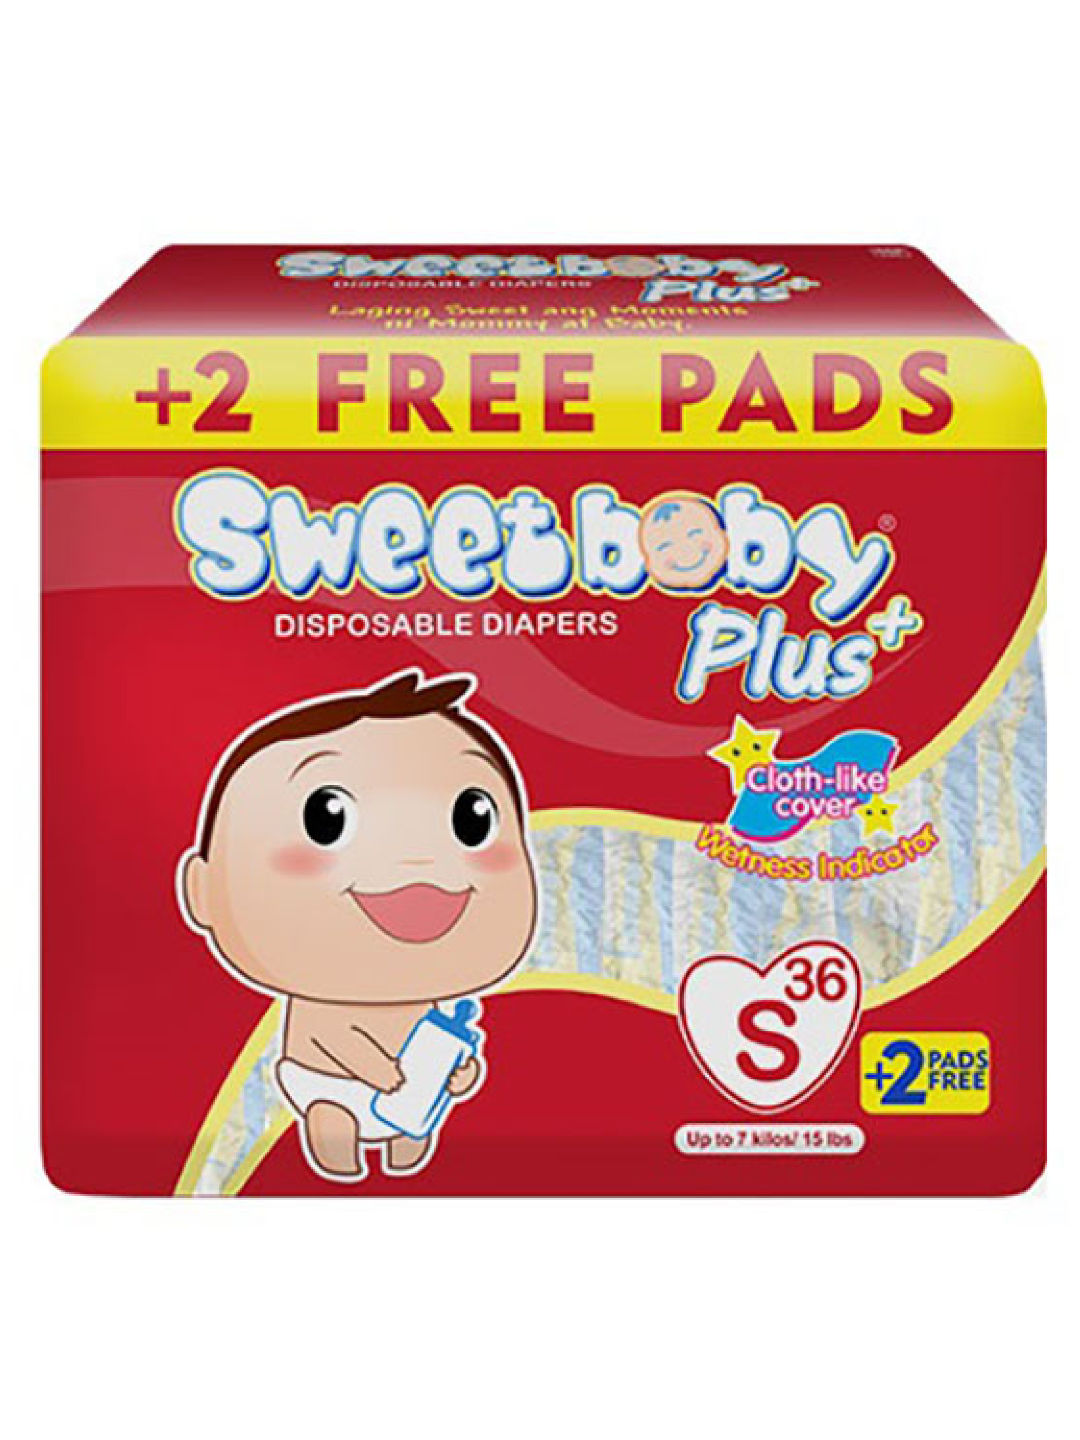 Sweetbaby Plus Disposable Diapers Small Big Pack (36s)